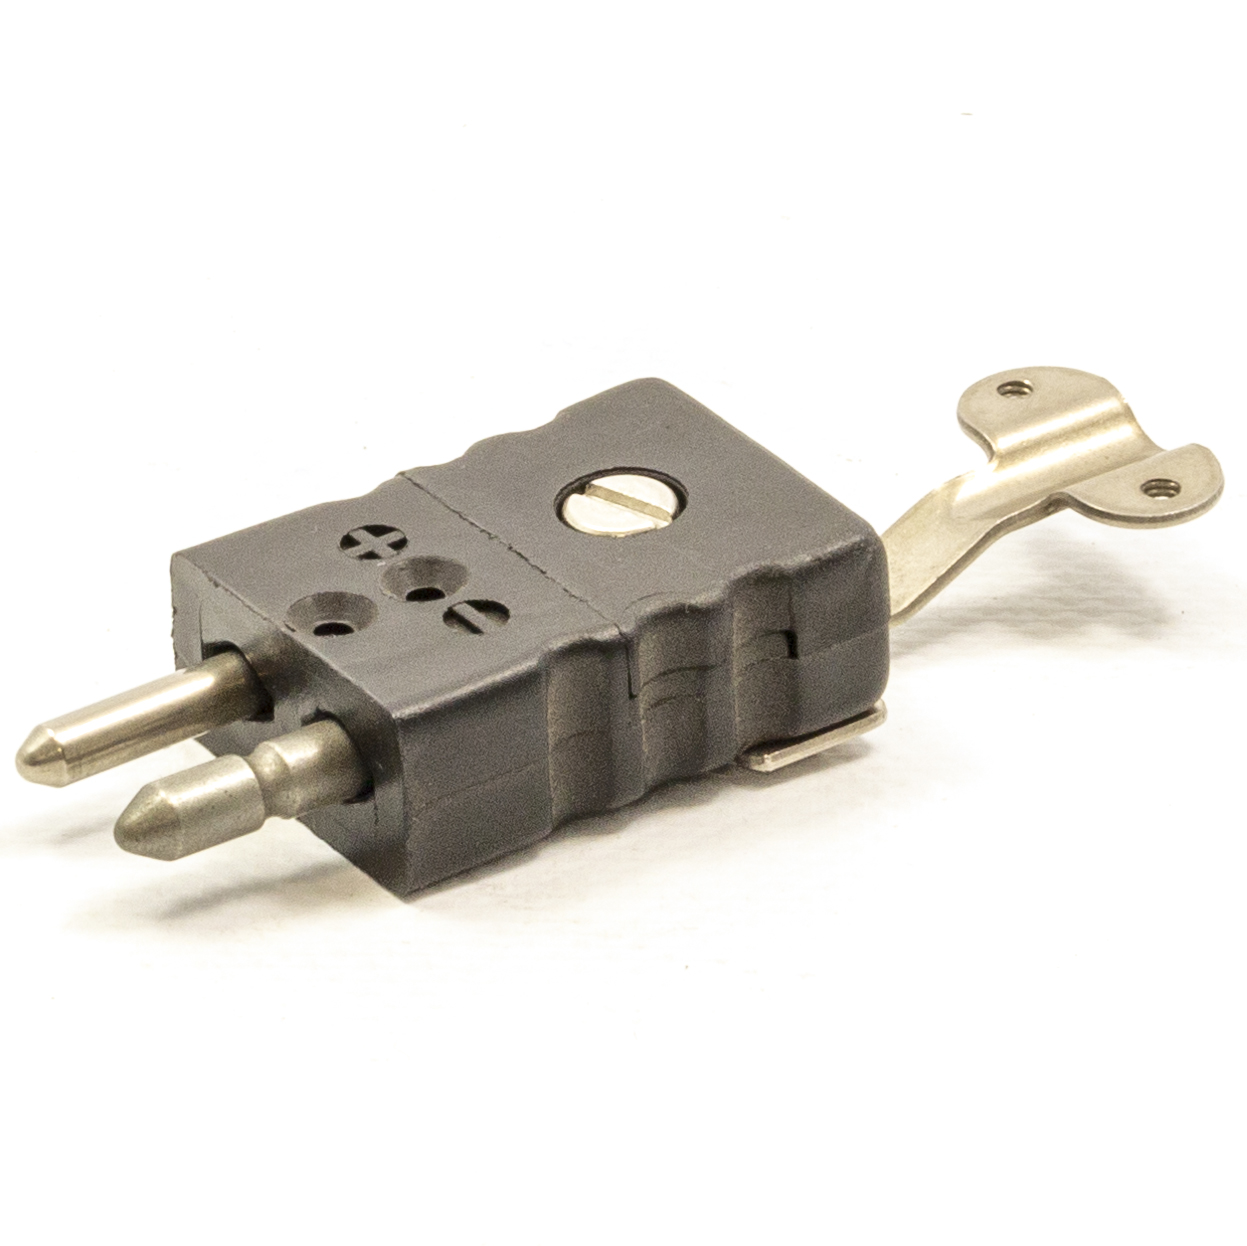 ABMR 000575 Connector with strain relief